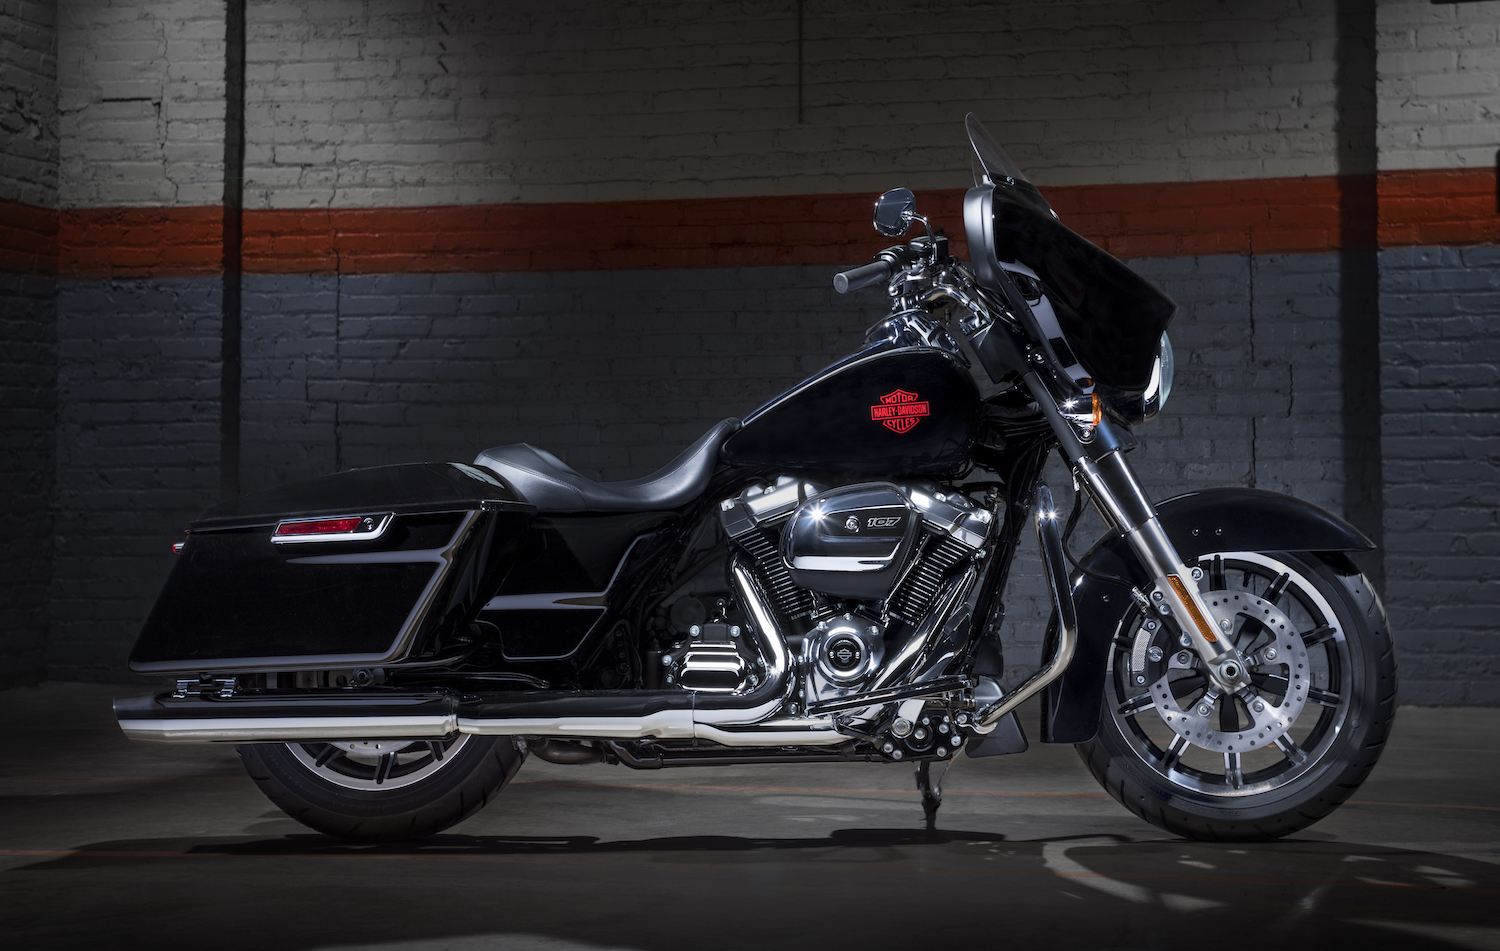 The 2019 Harley Davidson Electra Glide Standard Is The Dressed